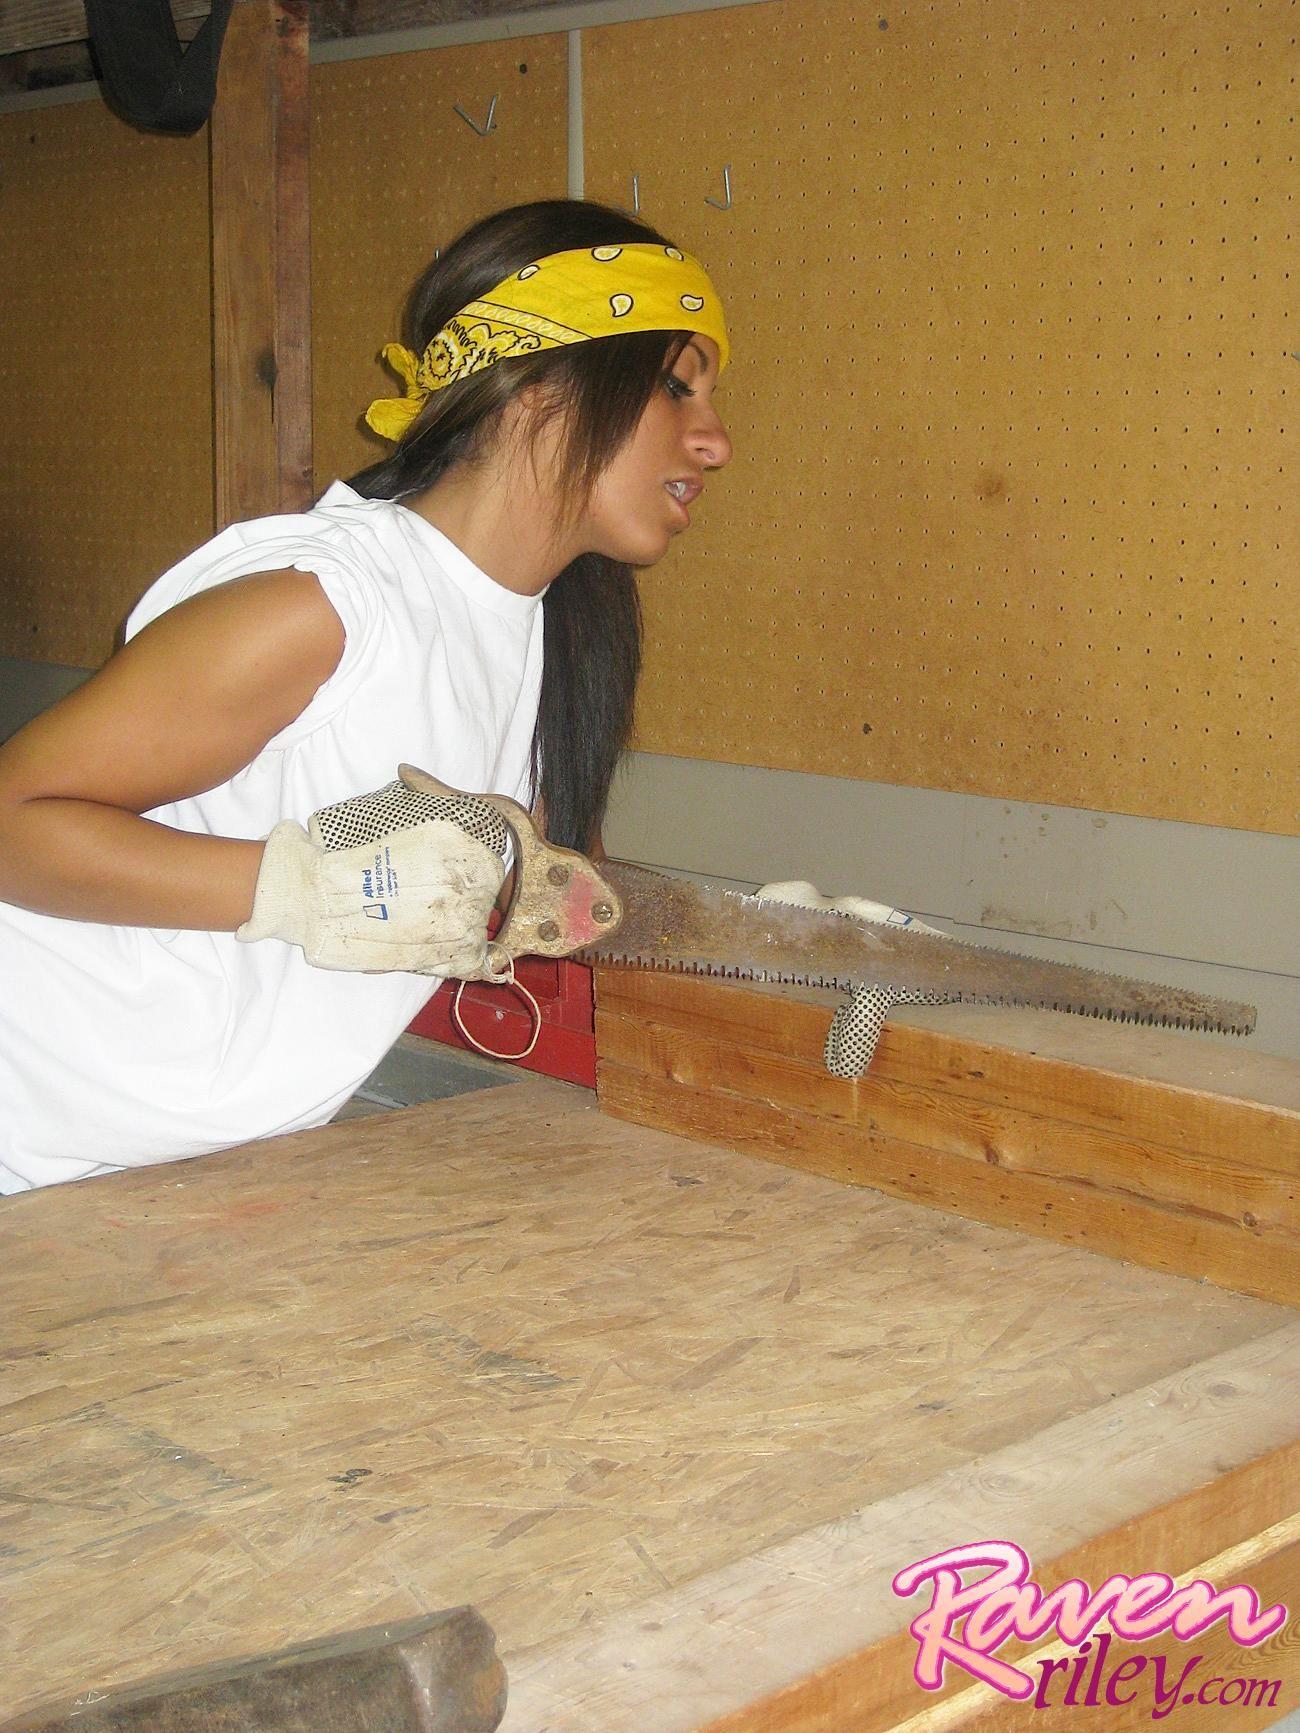 Pictures of Raven Riley doing some home renovations #59854908